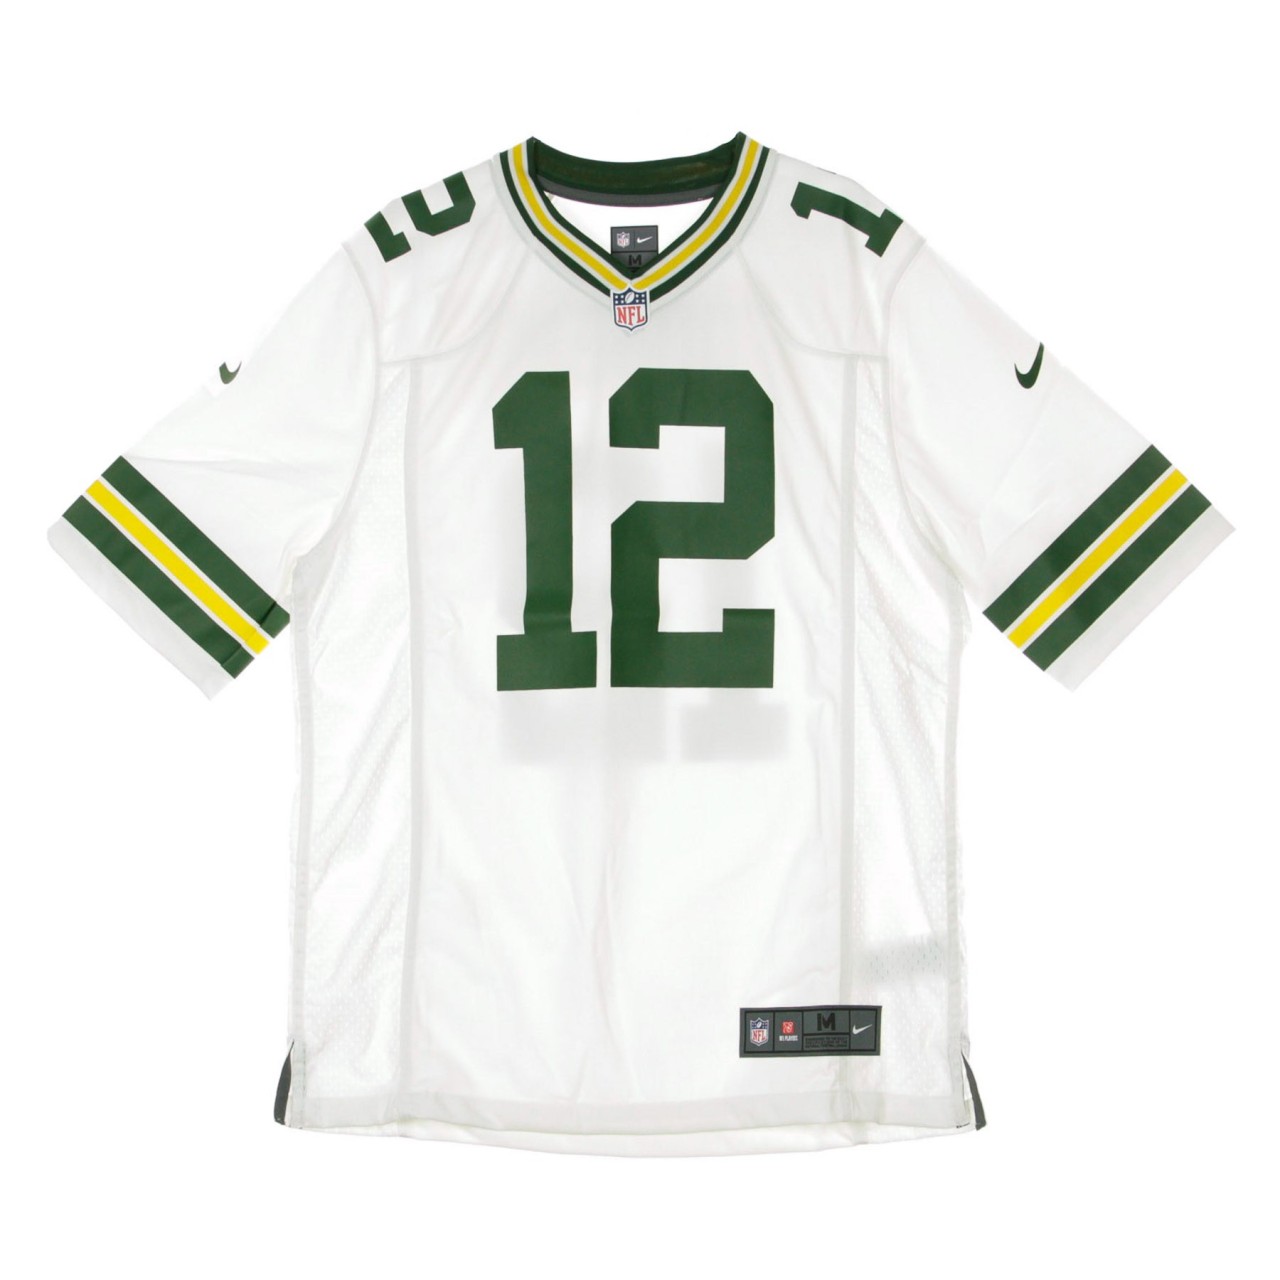 NIKE NFL NFL GAME ROAD JERSEY NO.12 RODGERS GREPAC 67NM-GPGR-7TF-2PA:260